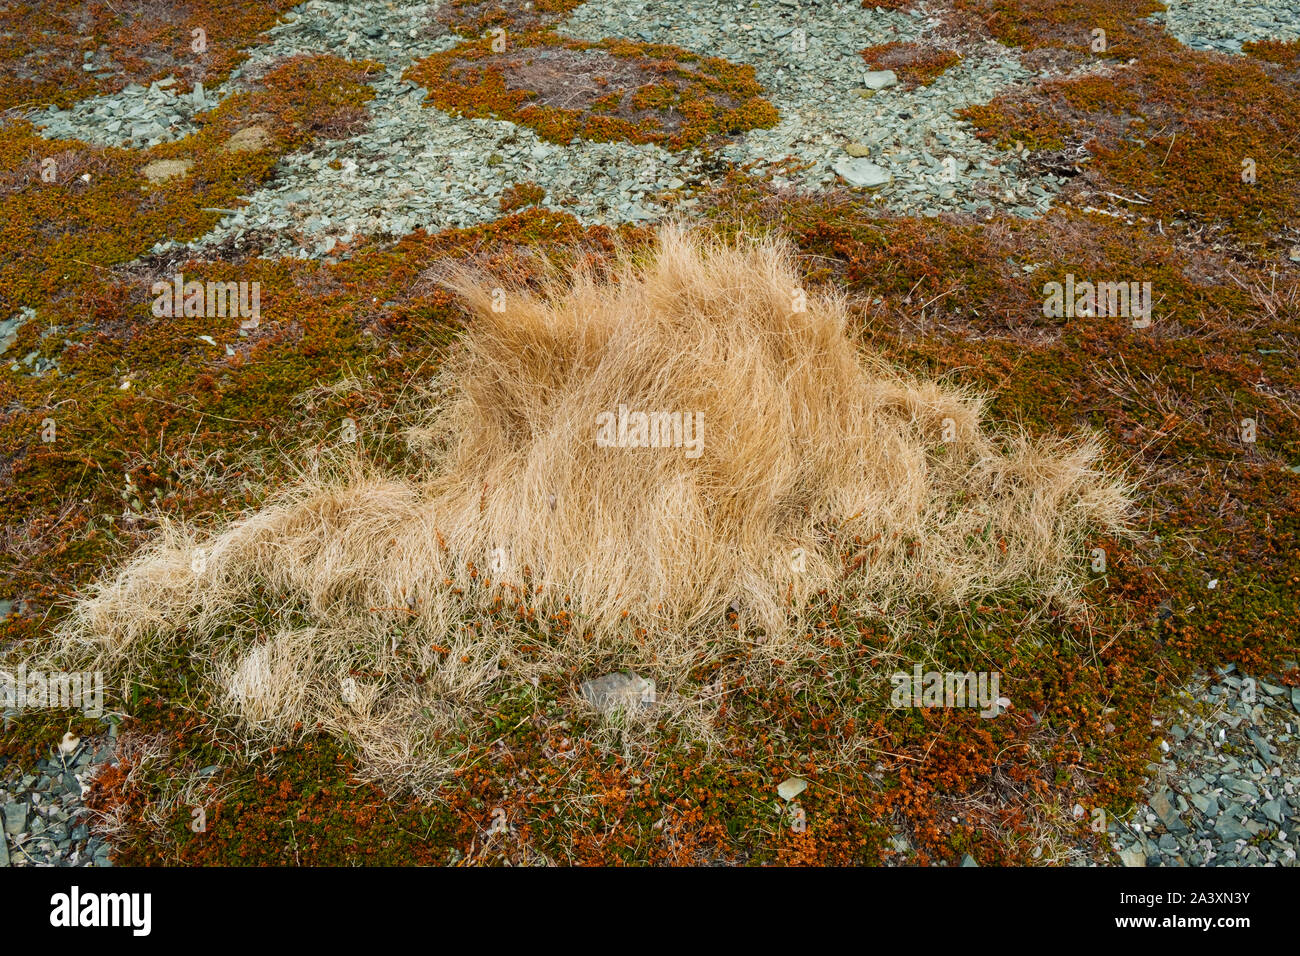 Hairy grass plant and other tundra plants in Goose Cove, Newfoundland on the Great Northern Peninsula Stock Photo